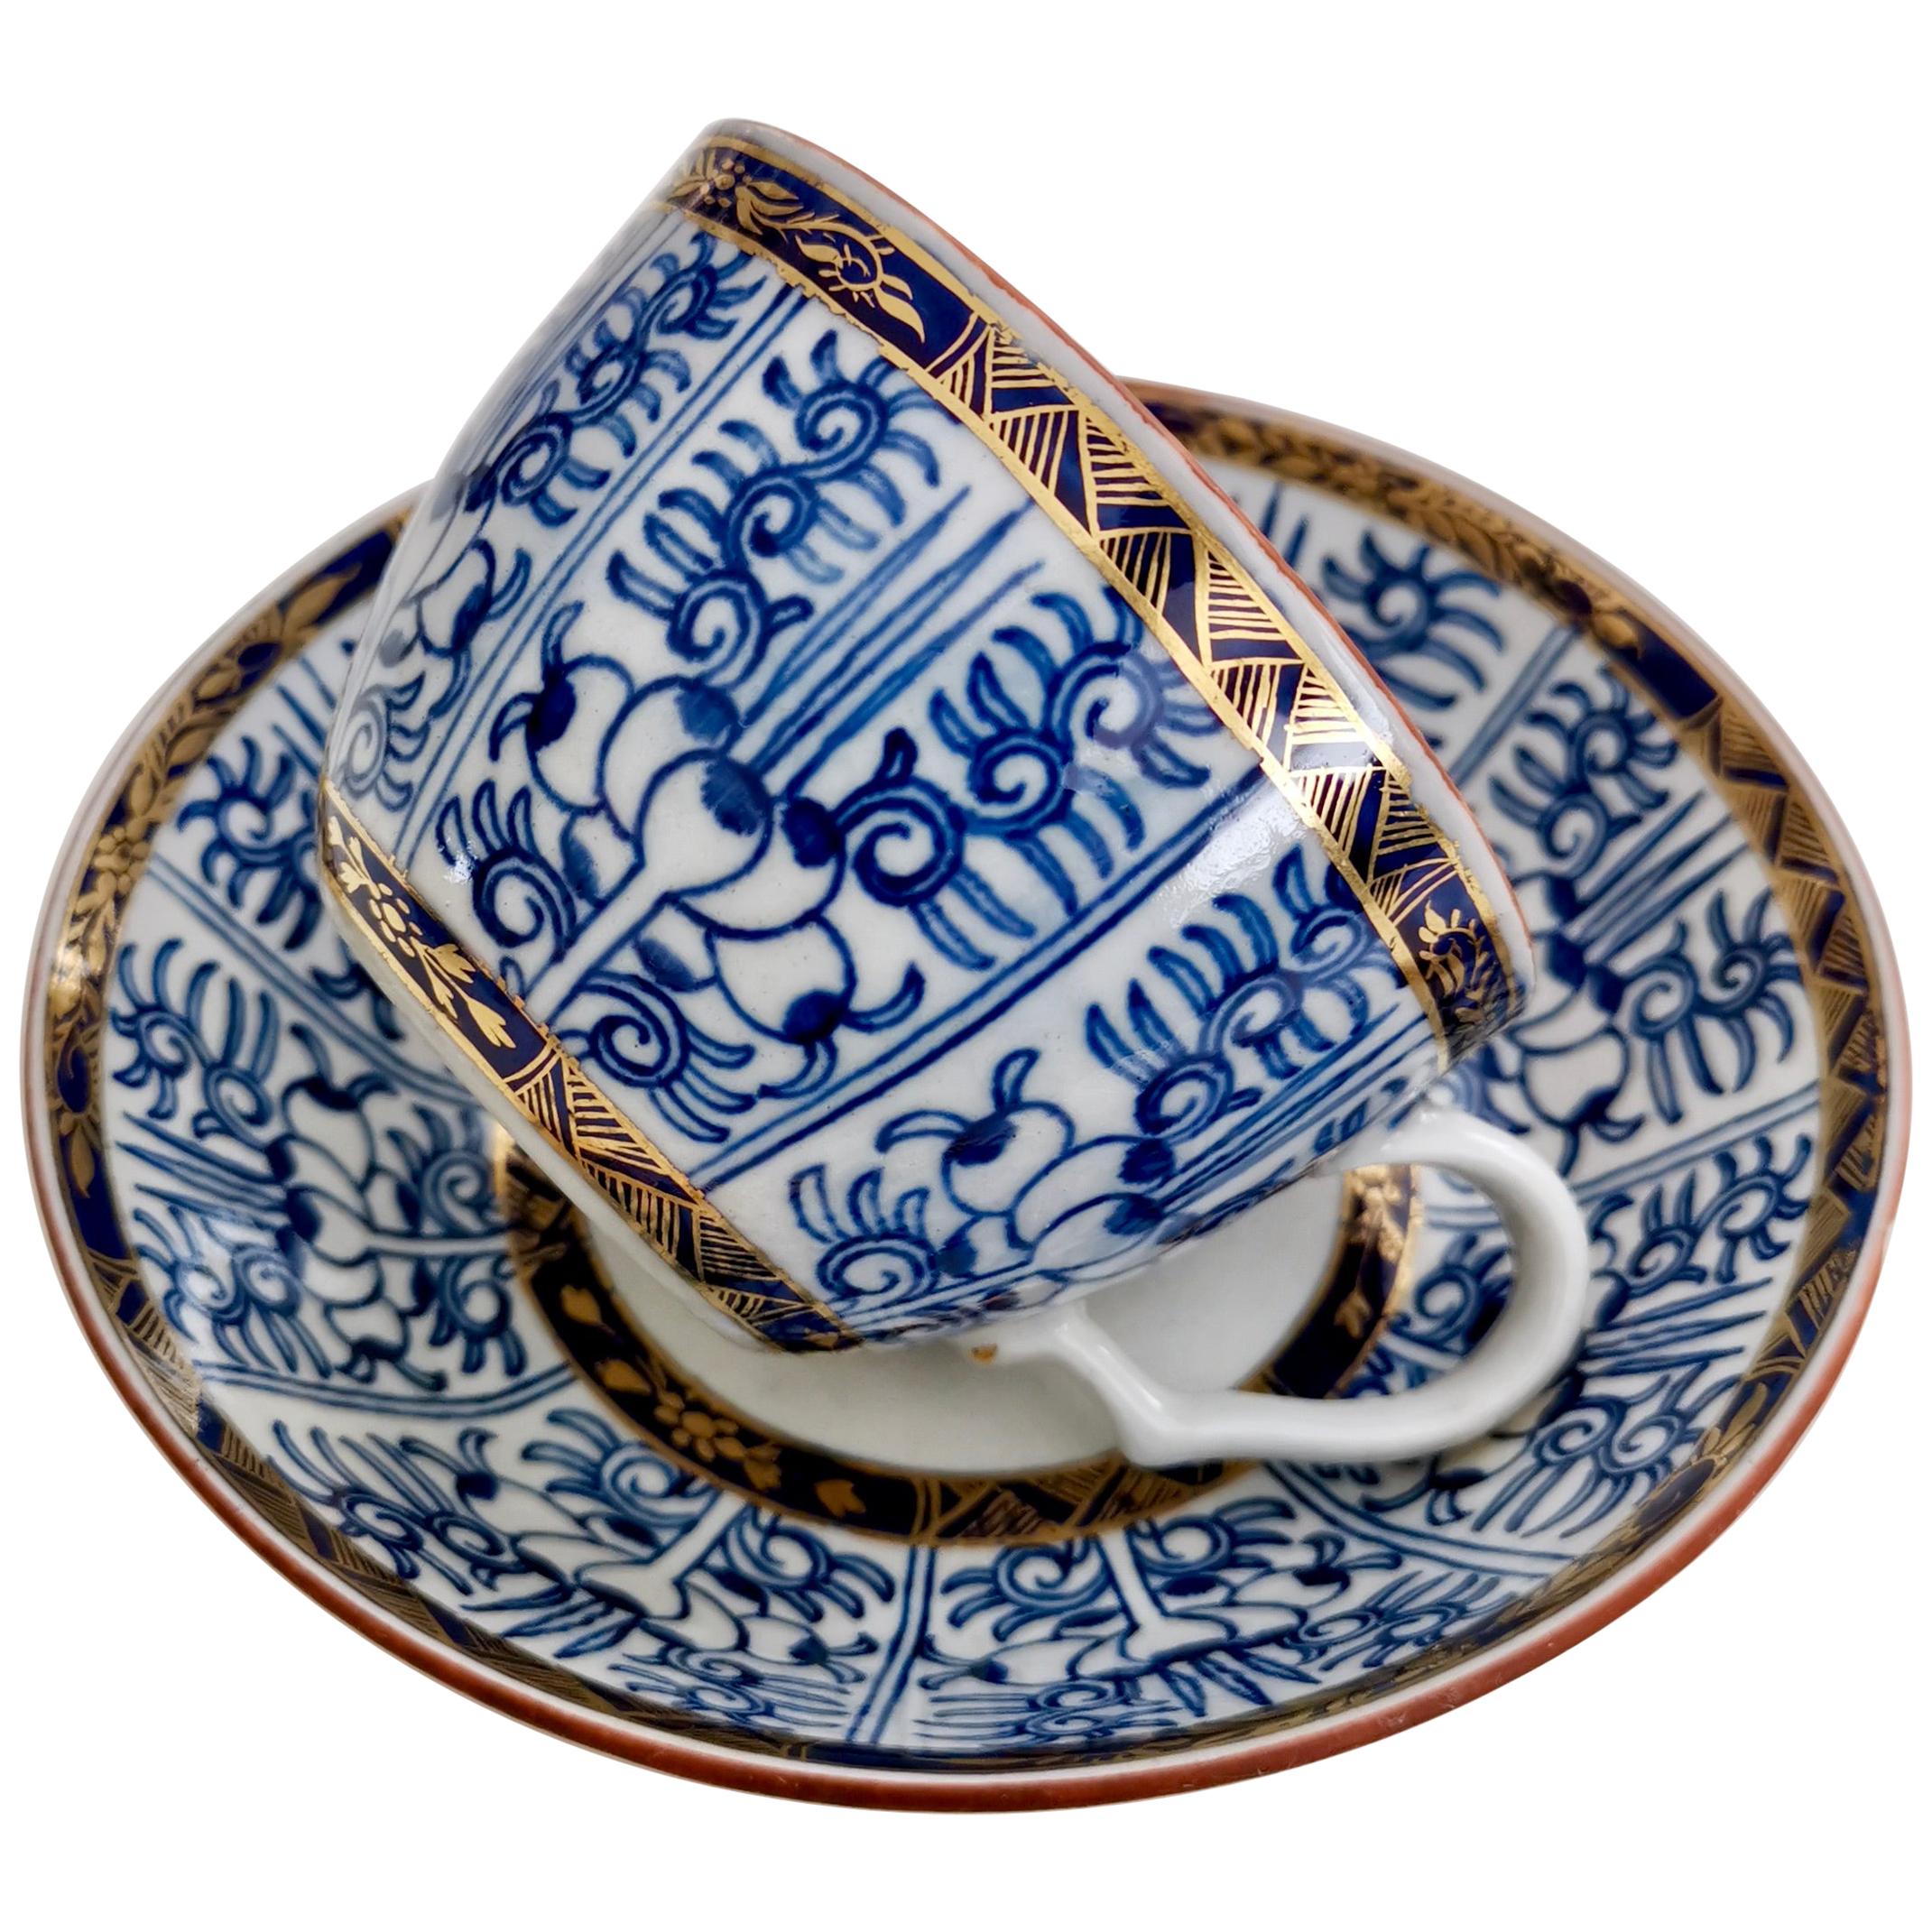 Chamberlain Worcester Porcelain Teacup, Blue Lily Pattern, circa 1815